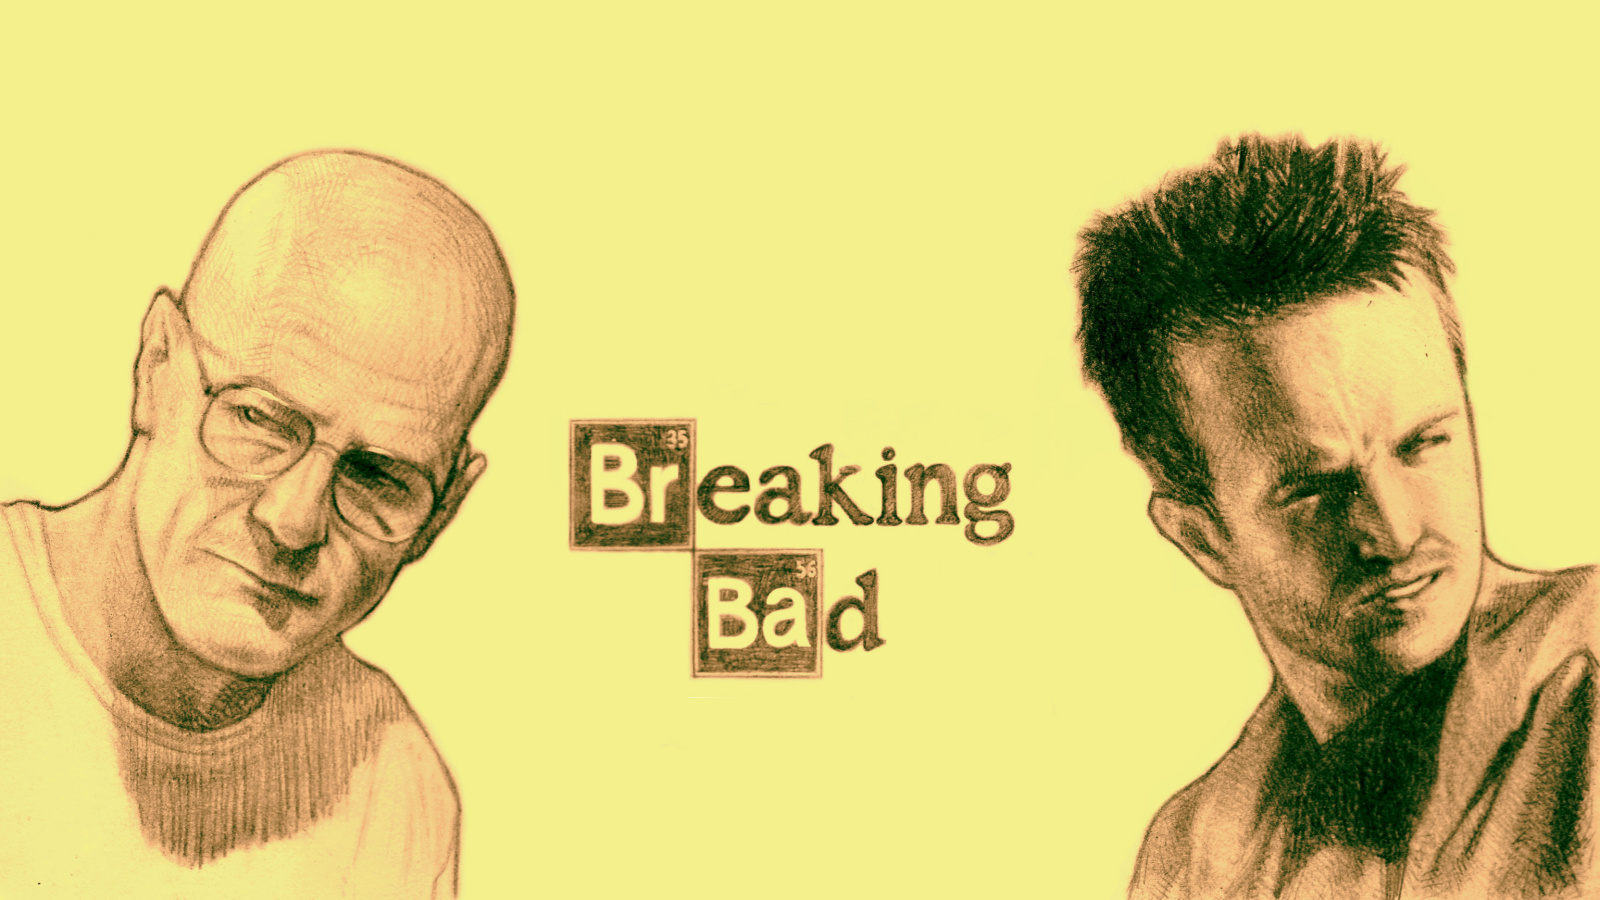 Walter White and Jesse Pinkman in Breaking Bad wallpaper 1600x900